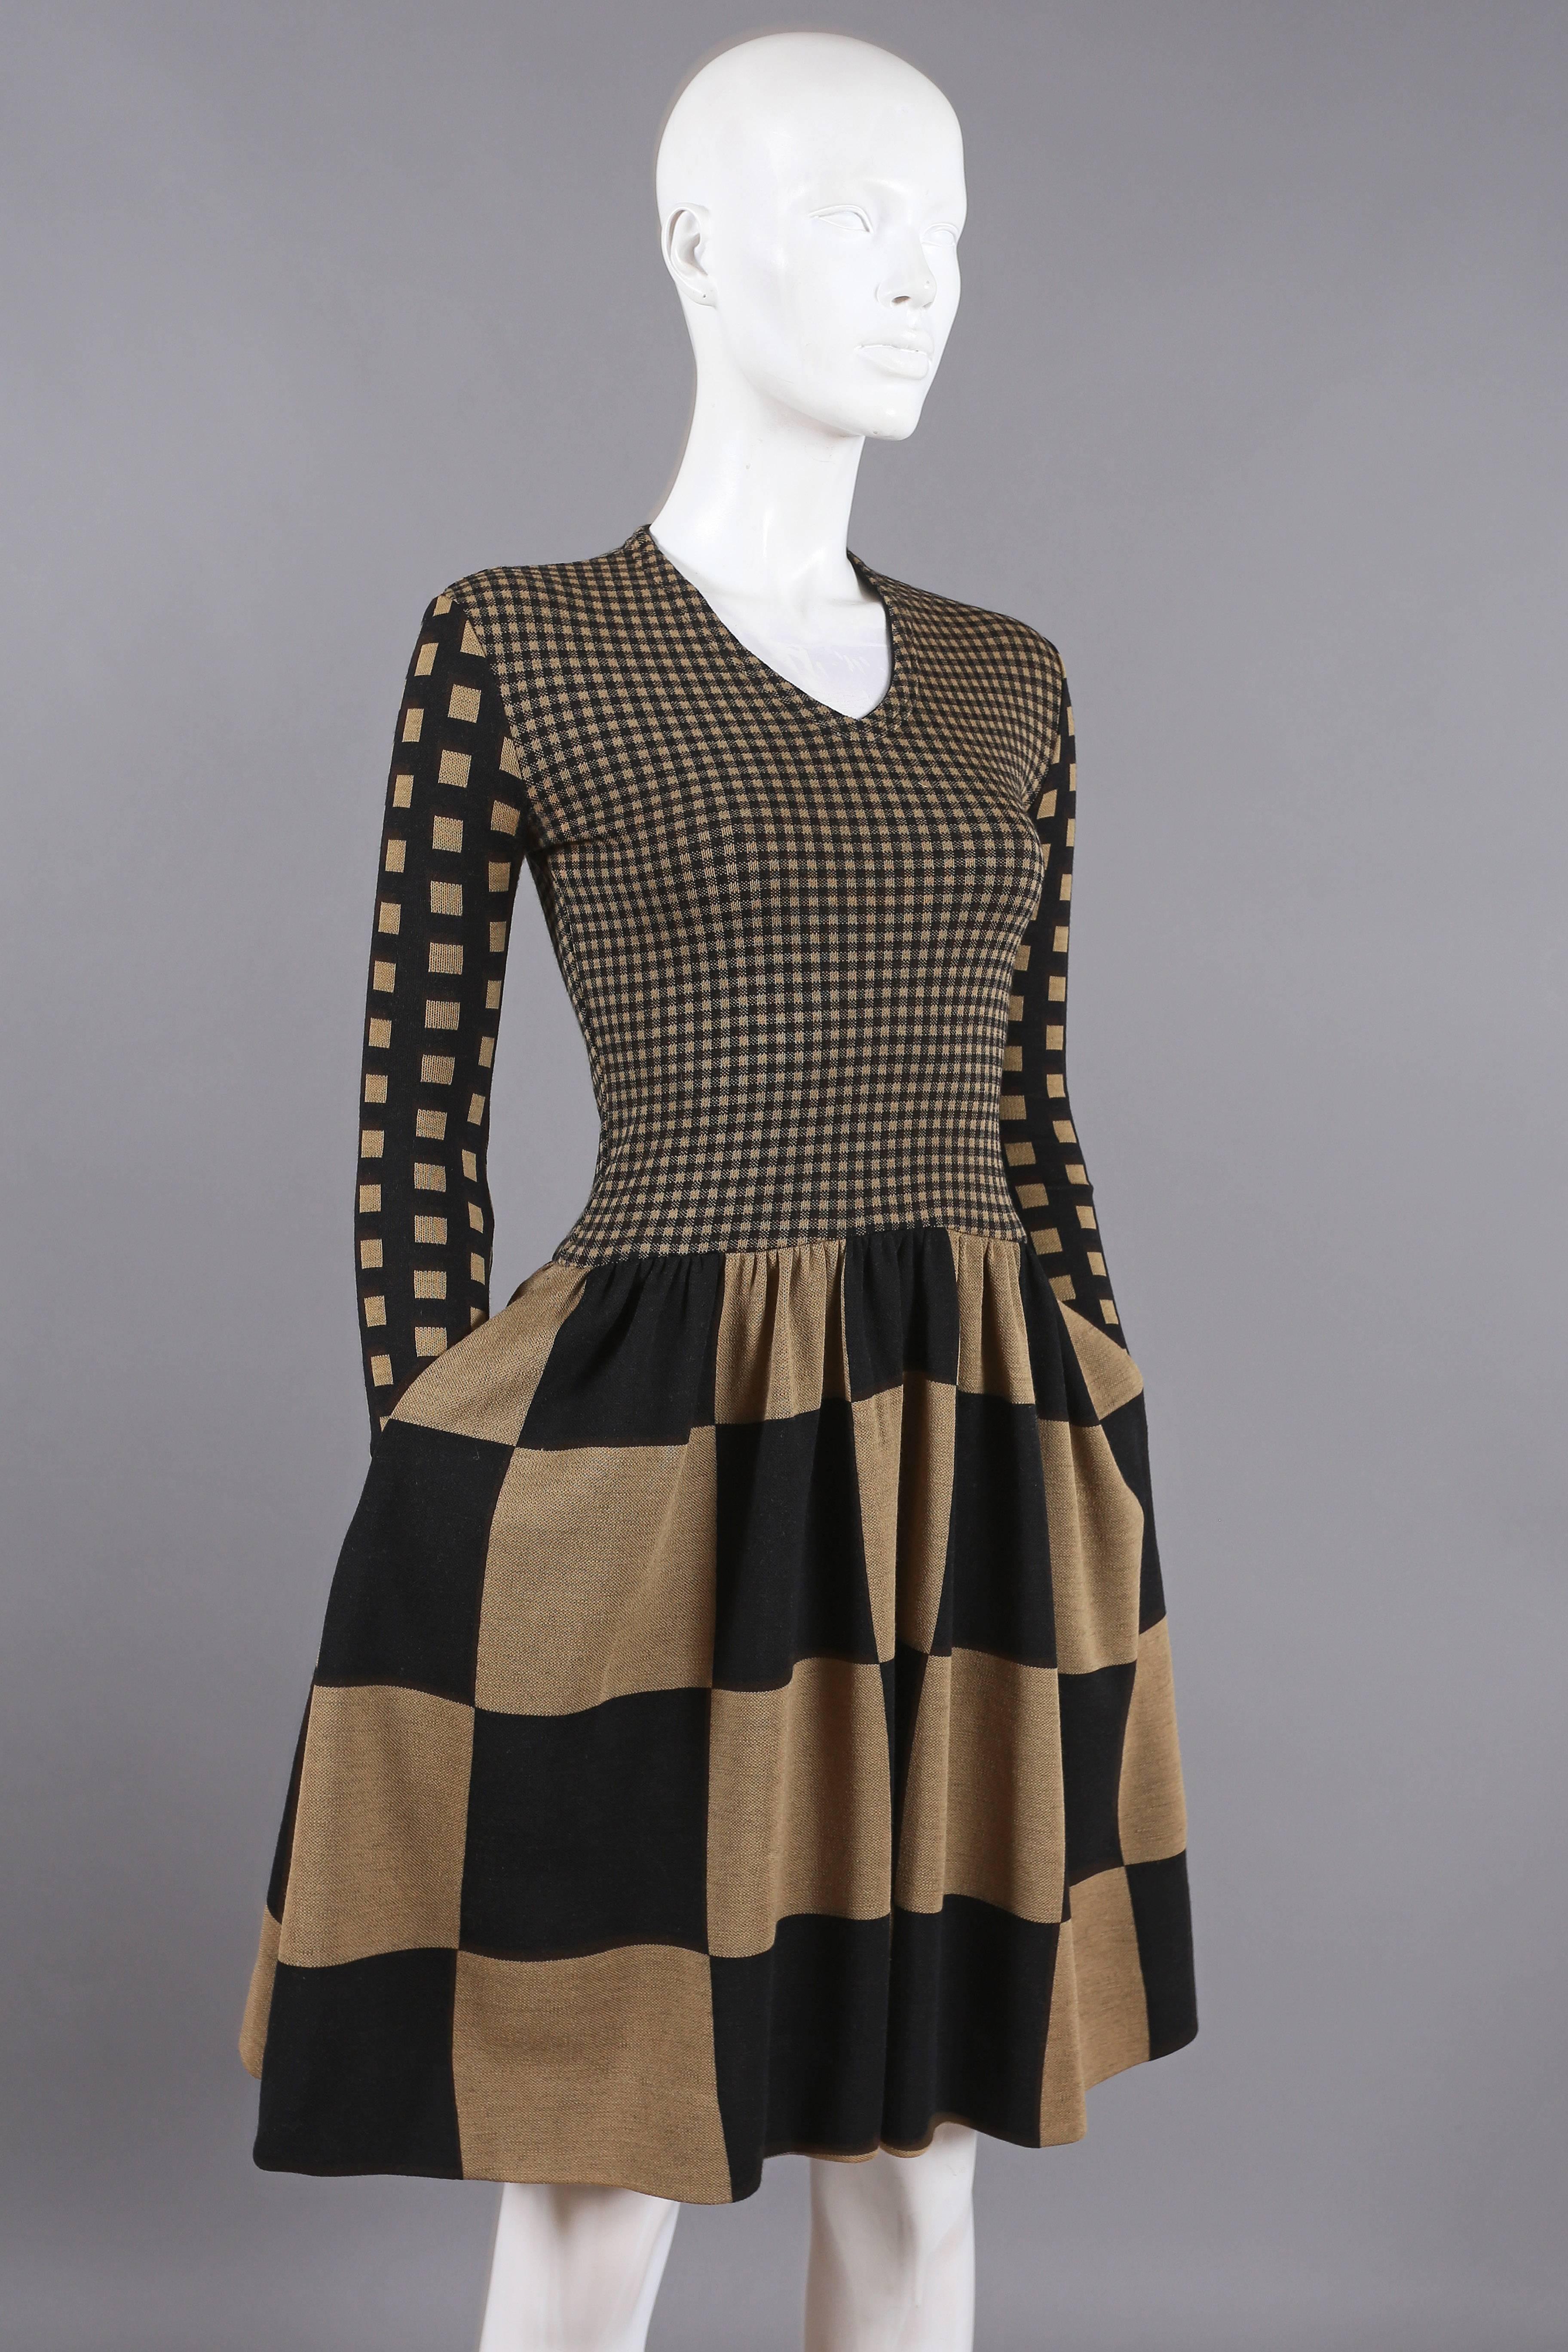 Rudi Gernreich knitted chessboard print dress, circa 1971. The dress features fitted bodice and sleeves, two side hidden pockets, pleated puff skirt and zip closure at rear. 

100% Wool

Laid flat measurments - Bust 32